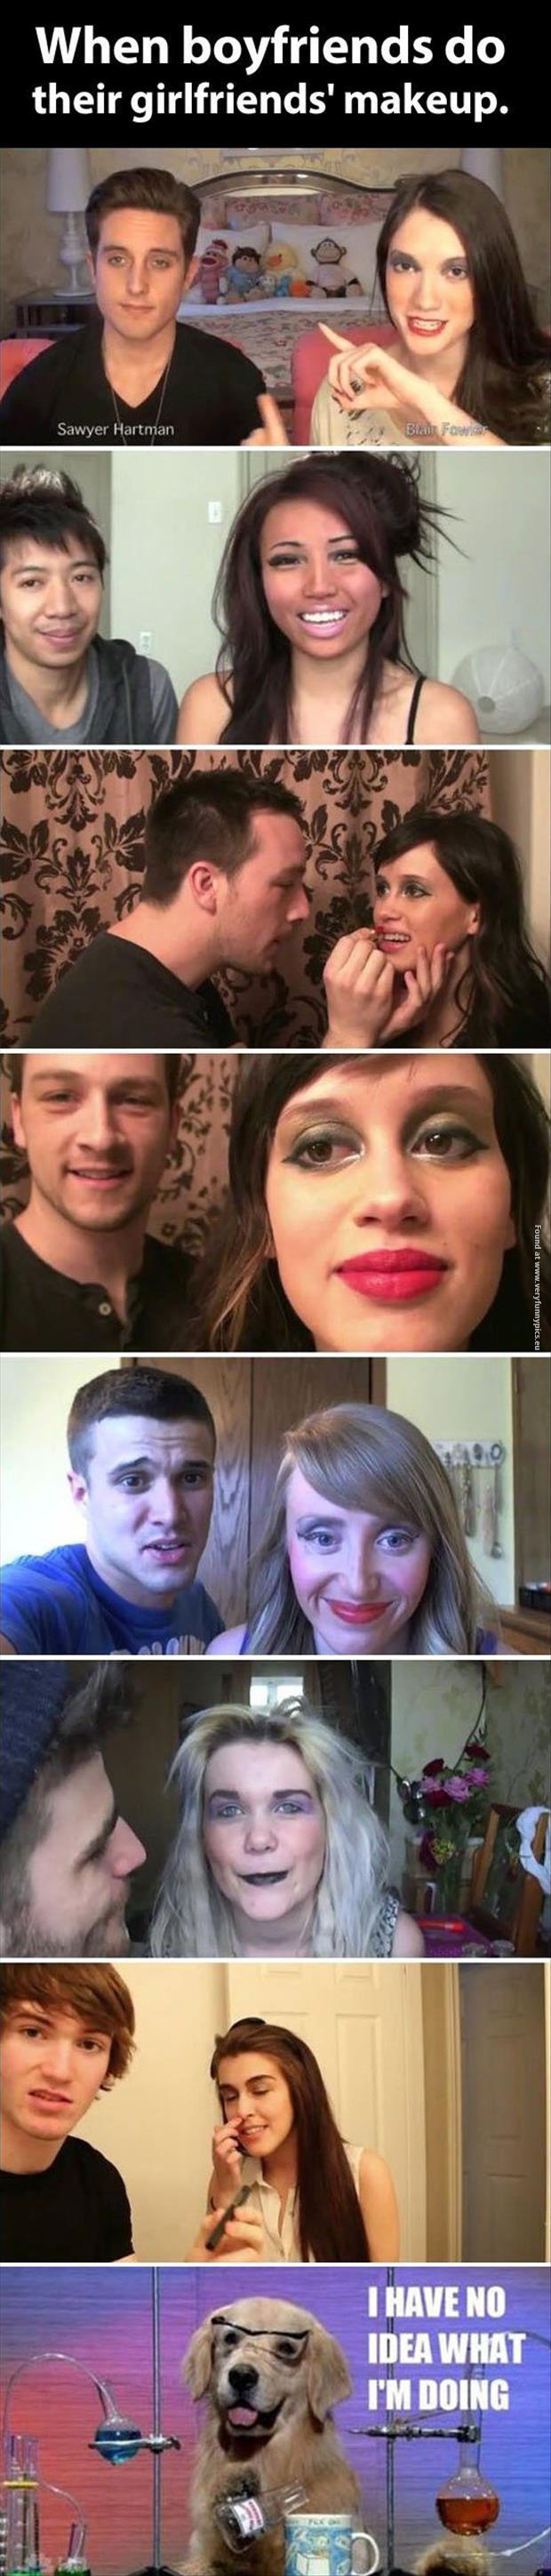 funny pictures when boyfriends does their girlfriends makeup